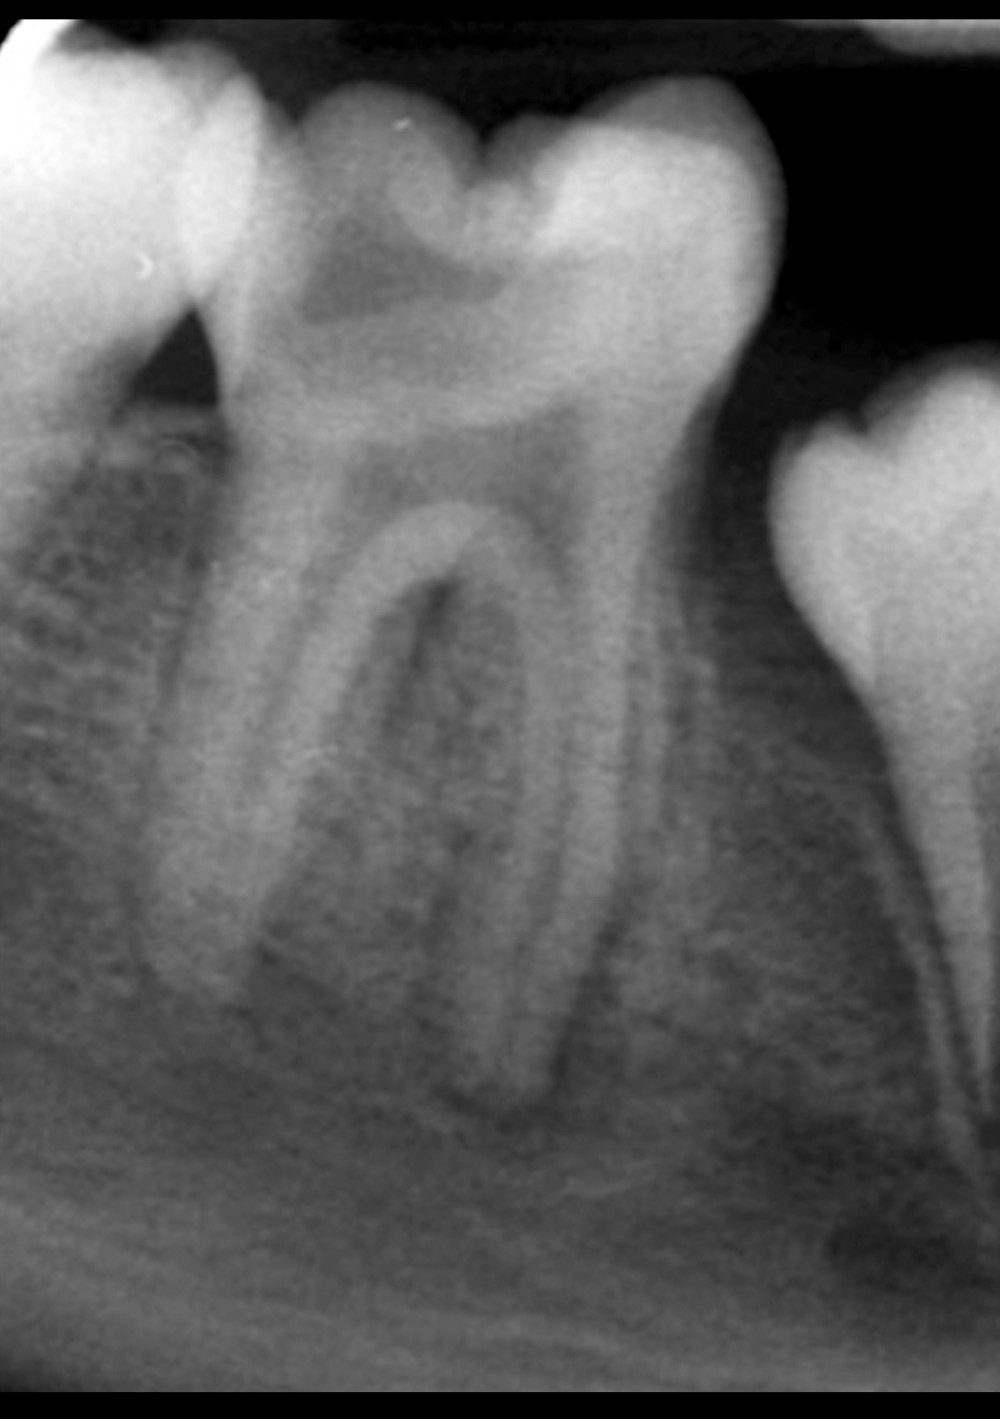 Preoperative intraoral periapical radiograph of a mature mandibular right first permanent molar tooth, revealing deep caries approaching the dental pulp with presence of periapical radiolucency and broken lamina dura around the mesial and distal roots, with a PAI score of 4.